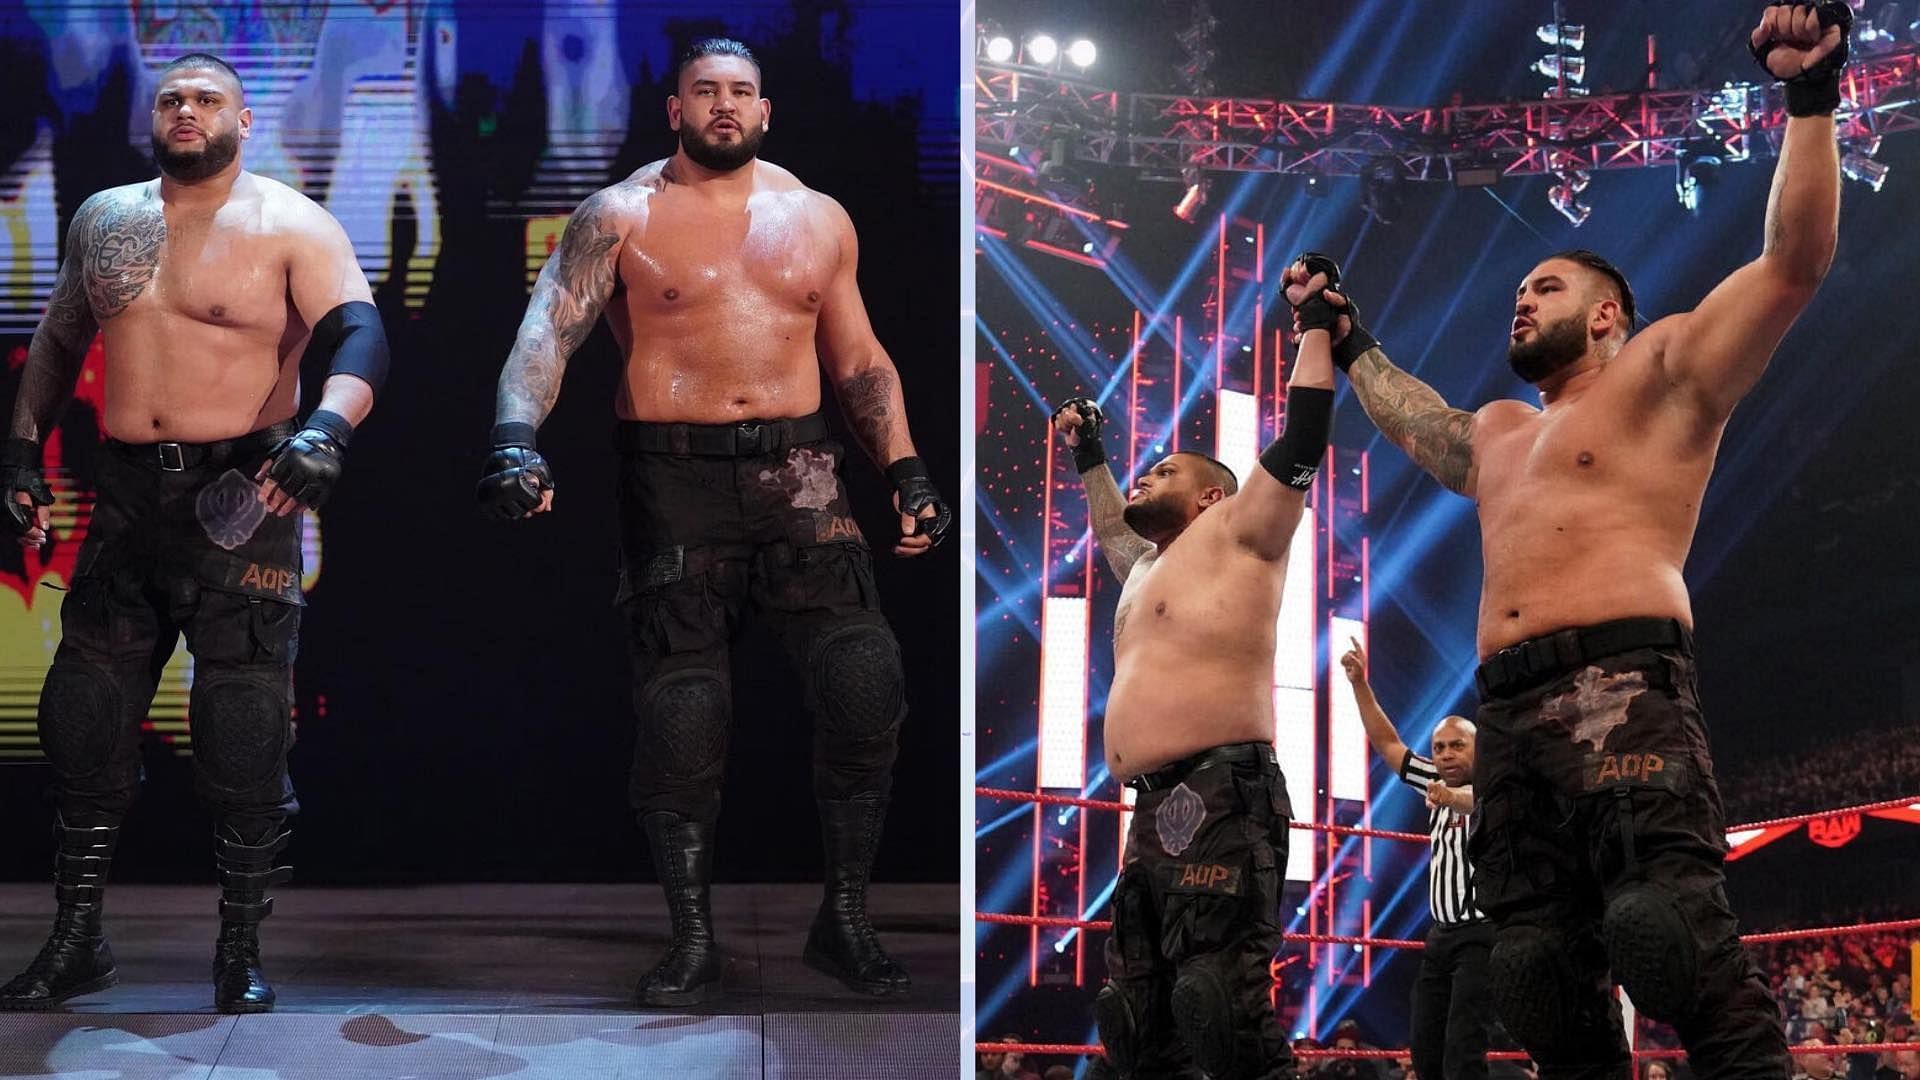 Authors of Pain